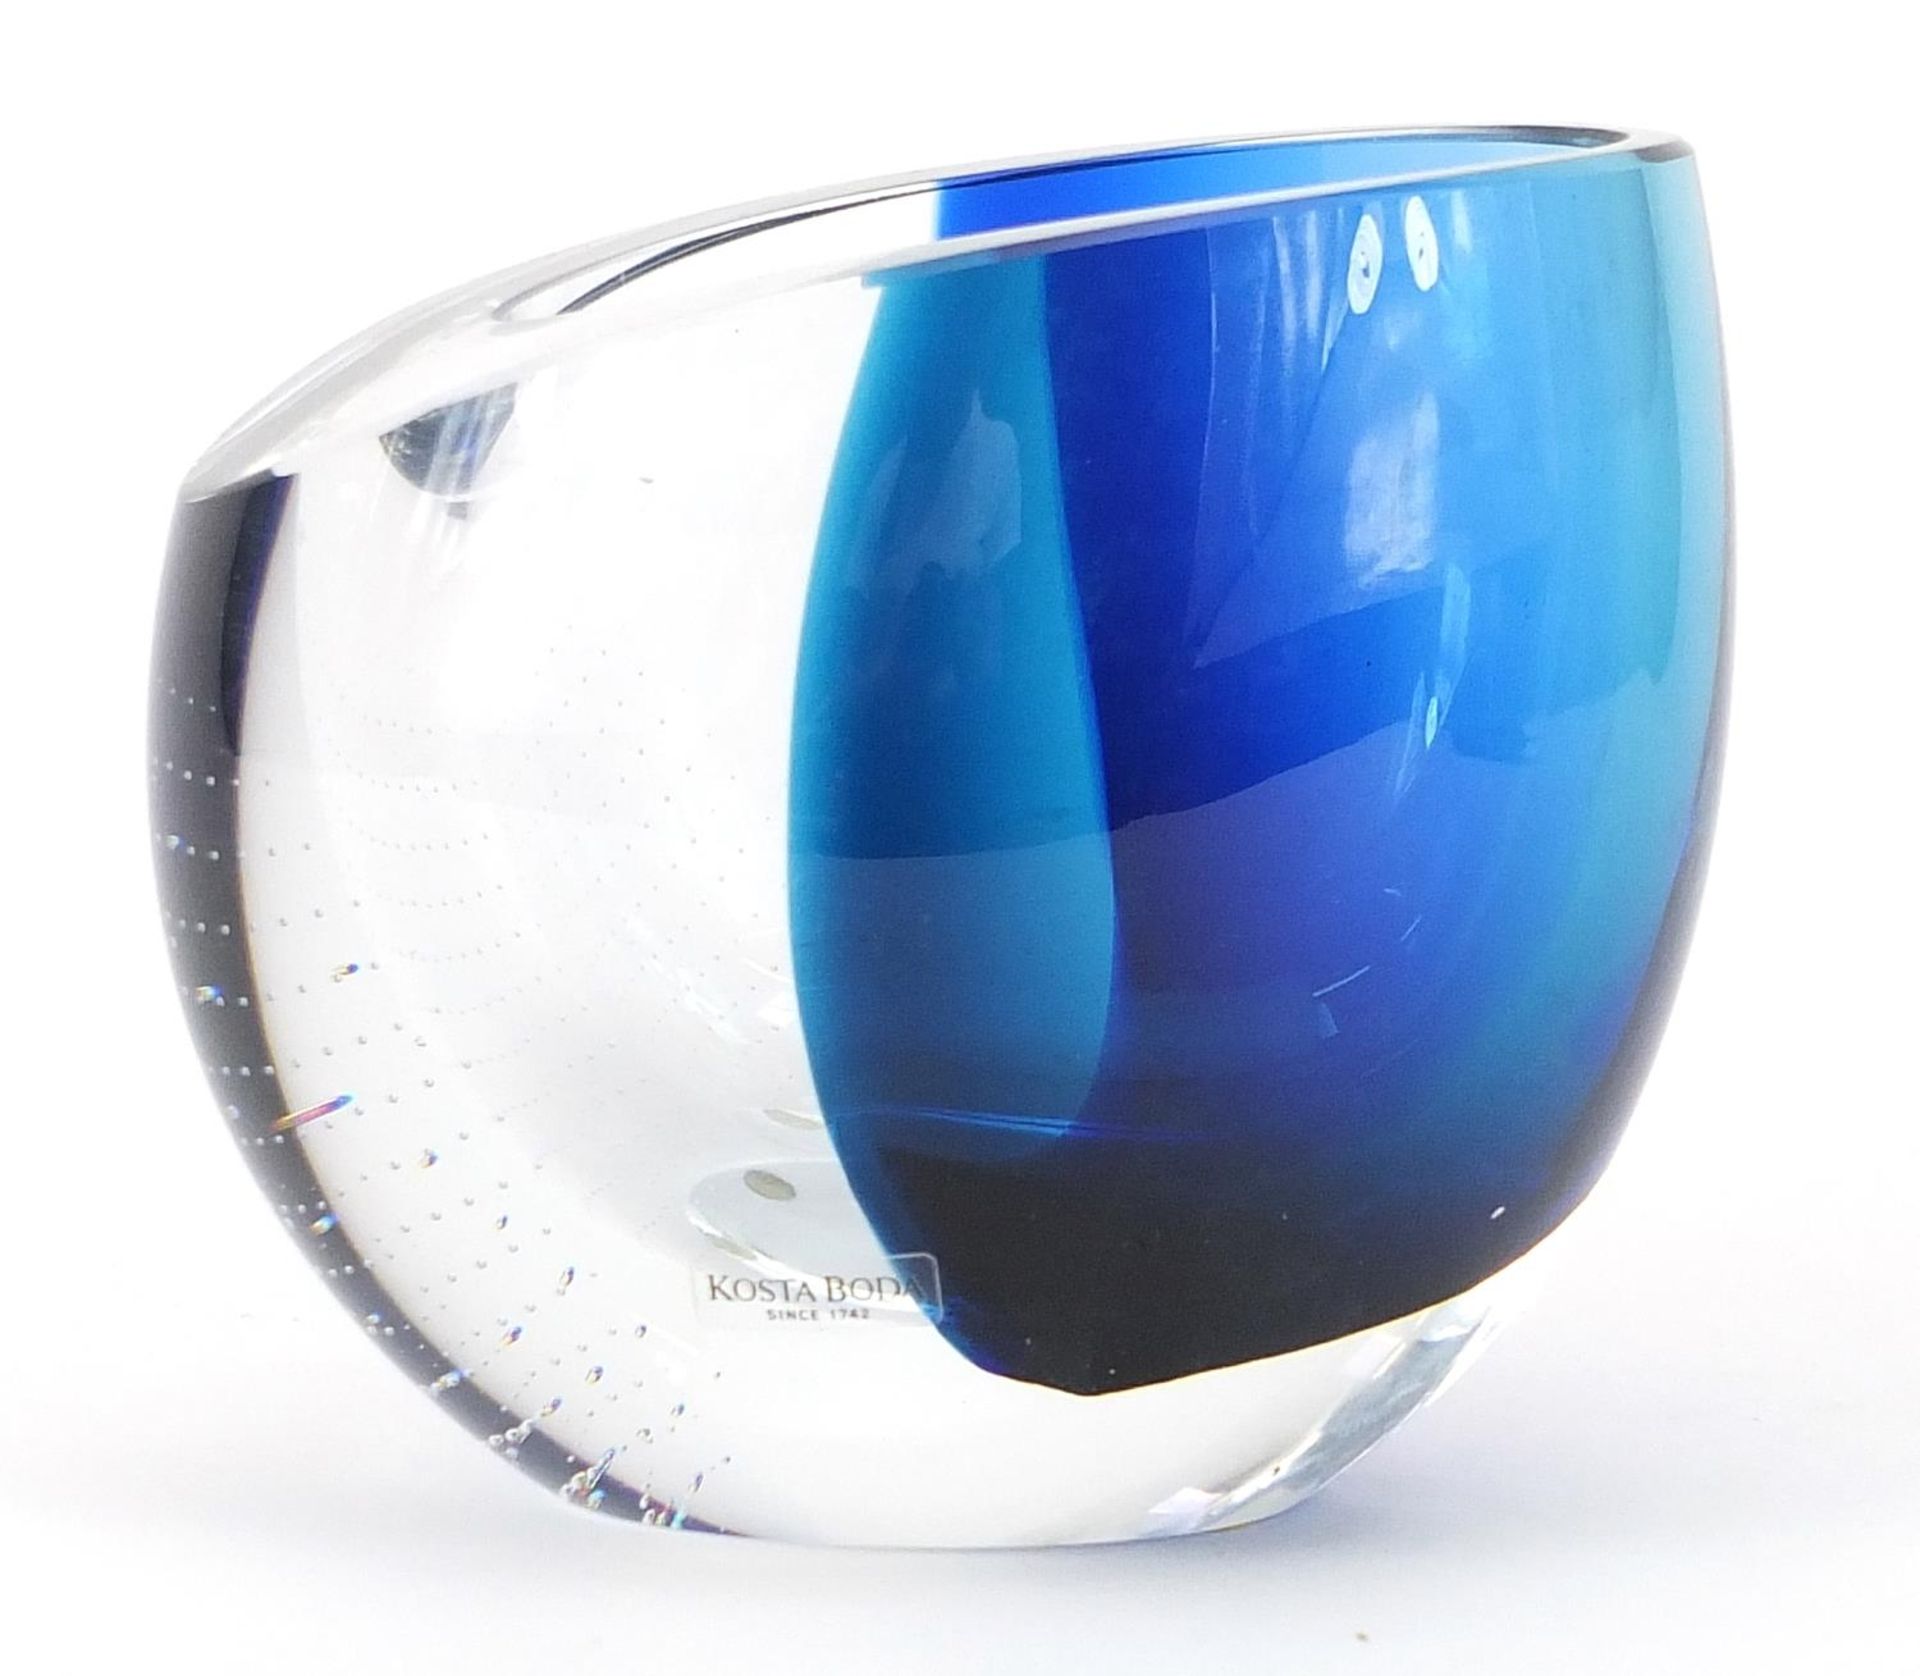 Goran Warff for Kosta Boda, Swedish blue and clear art glass vase, signed to the base, 12.5cm high - Image 2 of 5